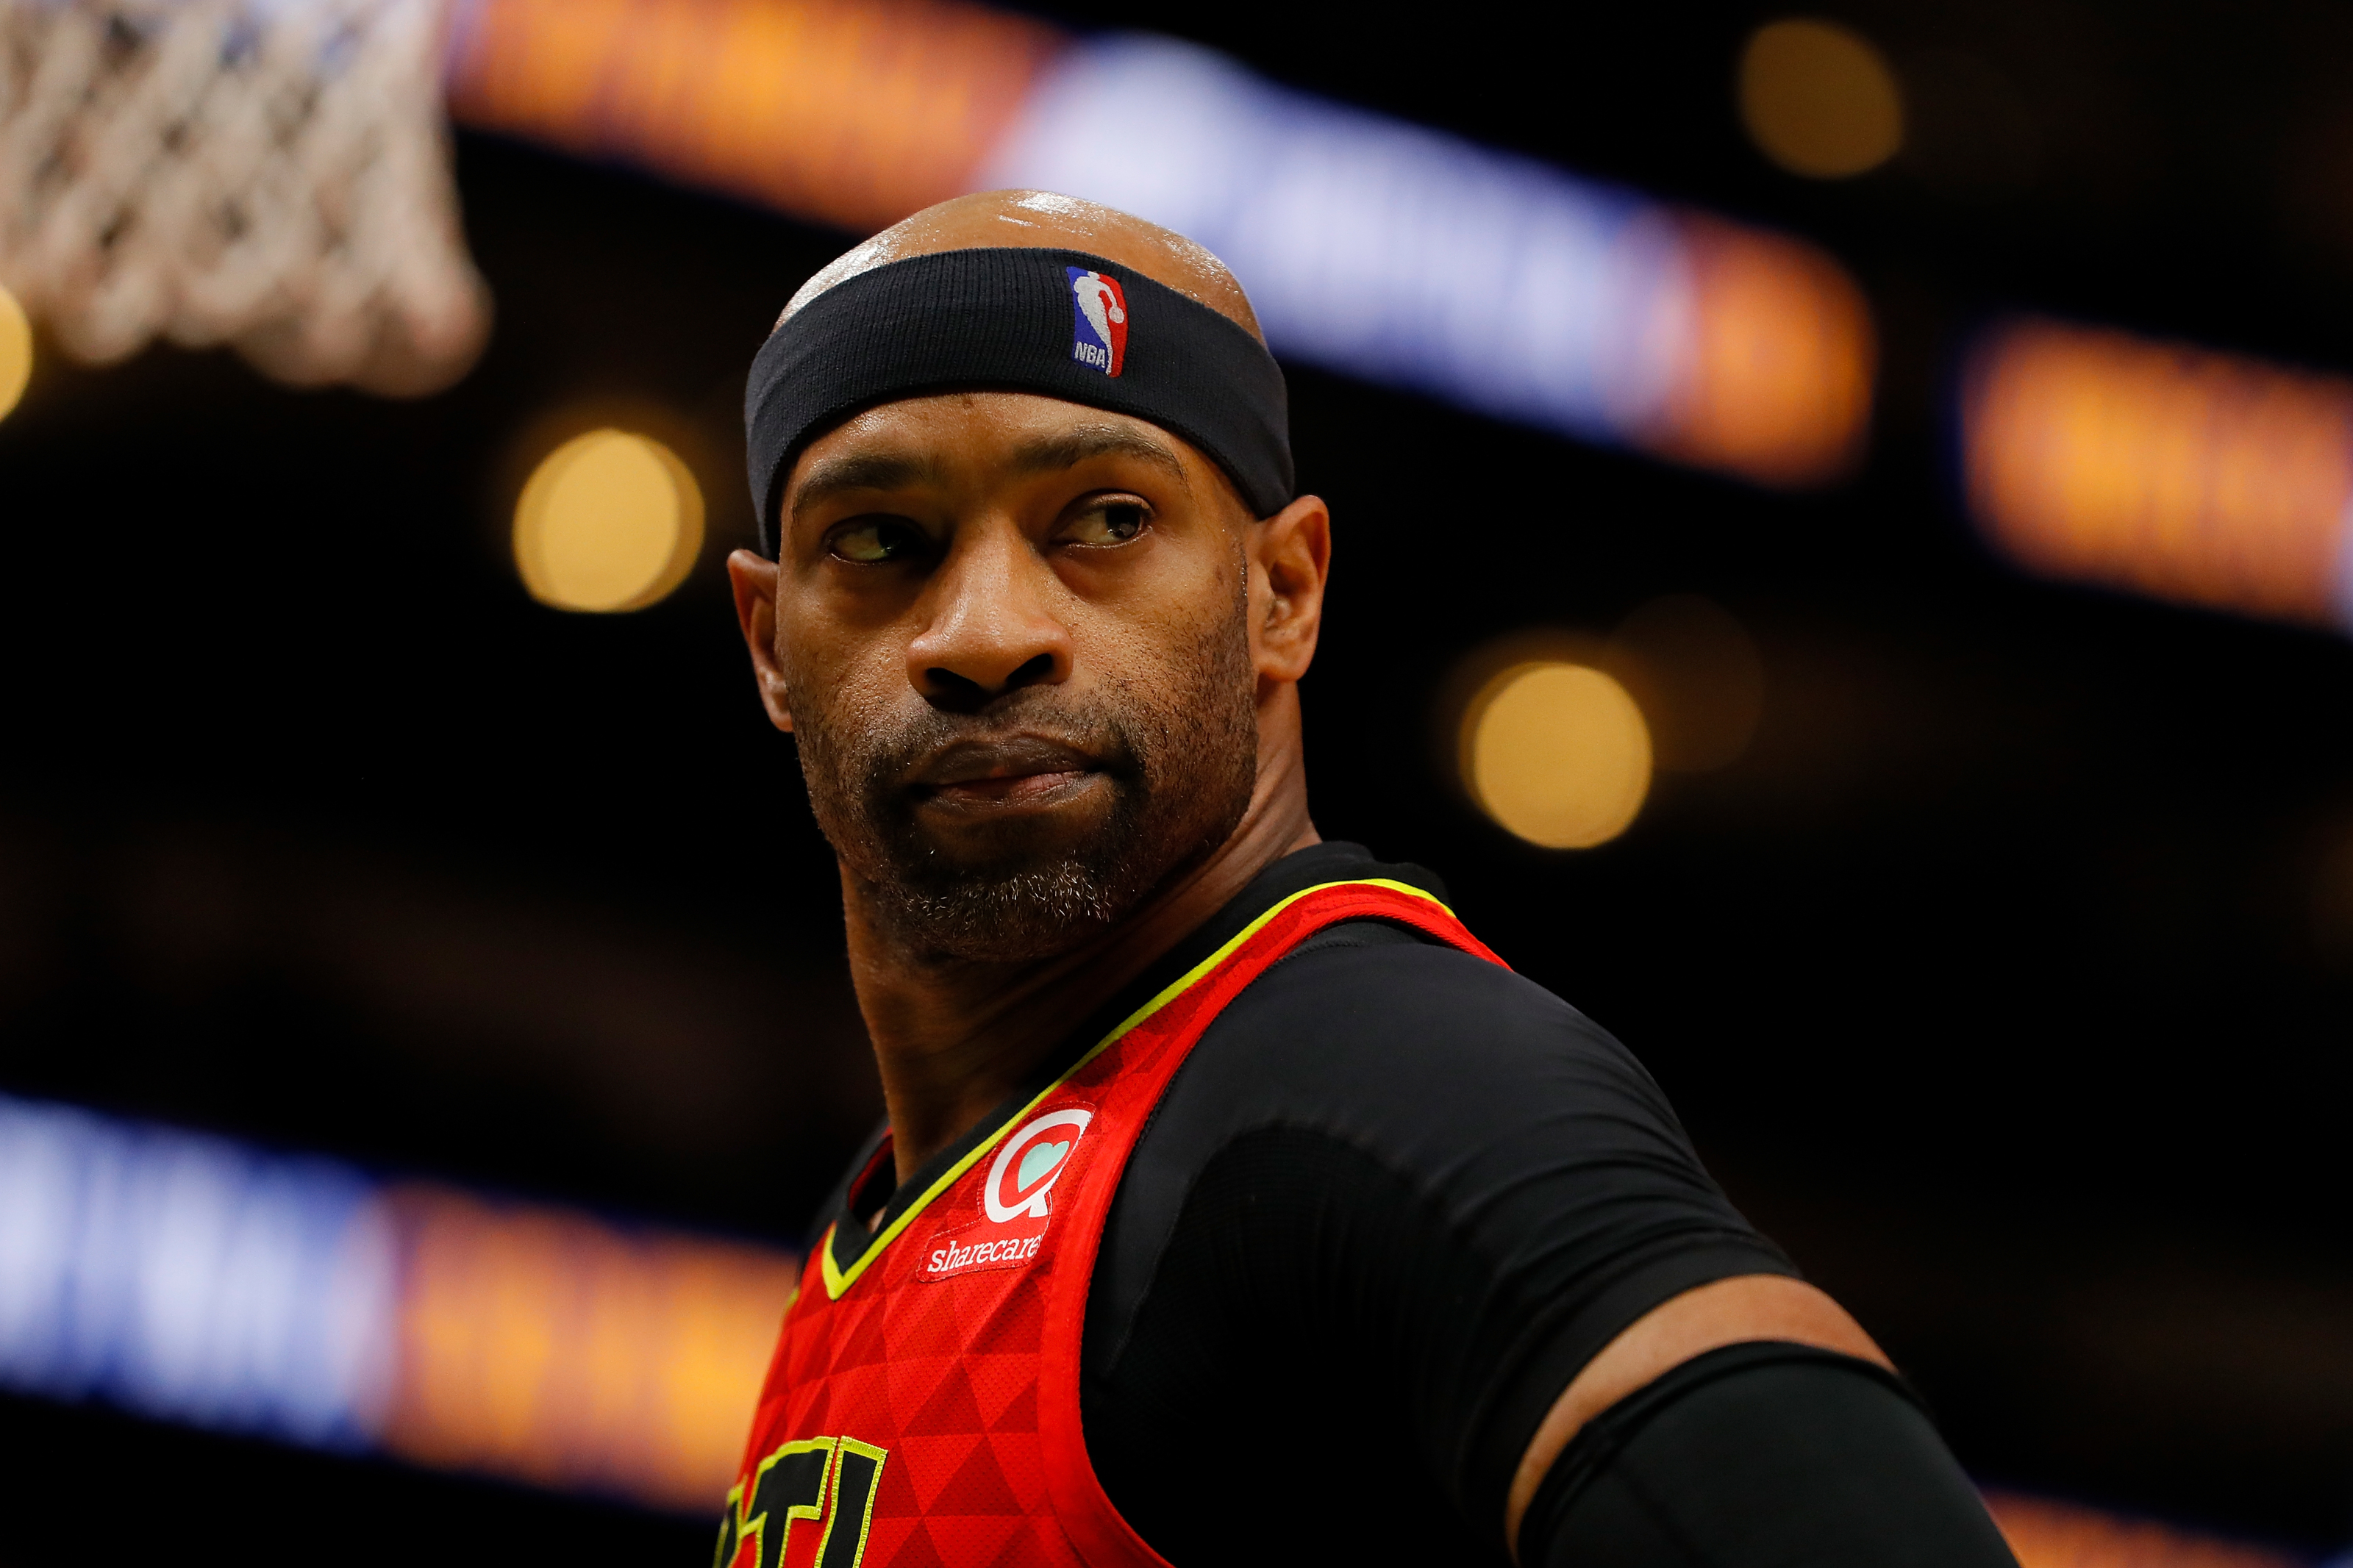 Gilbert Arenas on Vince Carter: “Vince Carter it was just easy. I'm so mad  at Vince for what he did to the game, The GOAT debate should've been him.  He was so